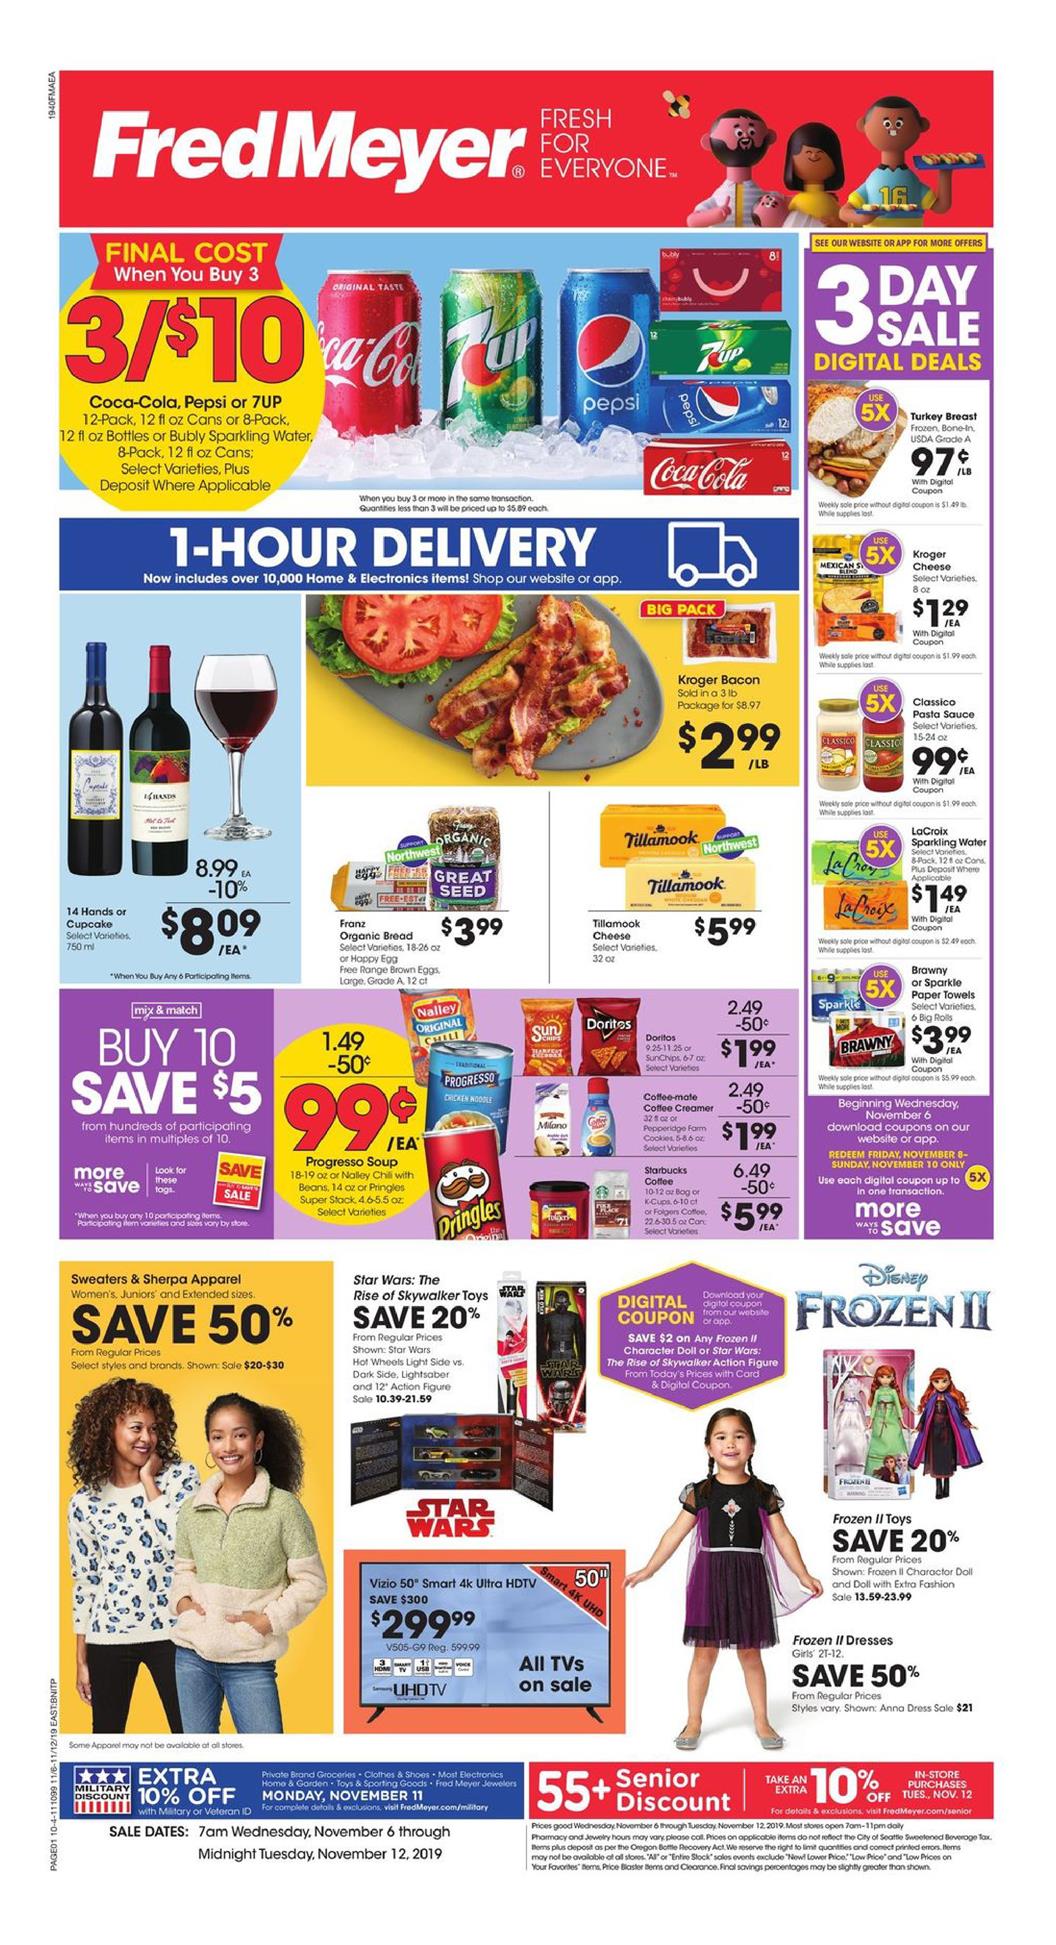 Fred Meyer Grocery Ad valid from Nov 6